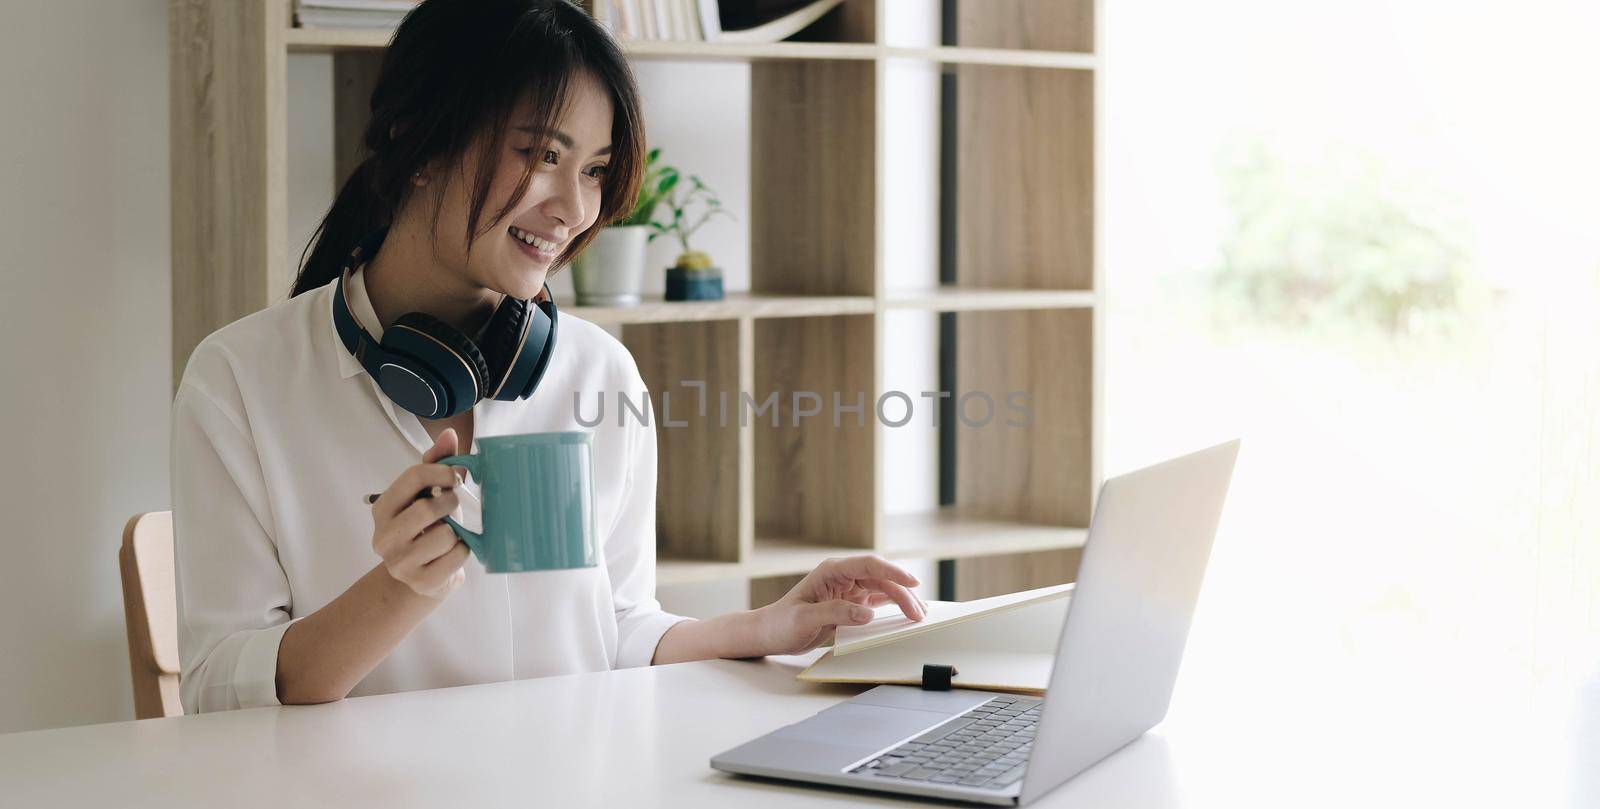 Young woman having video call on laptop computer at home
